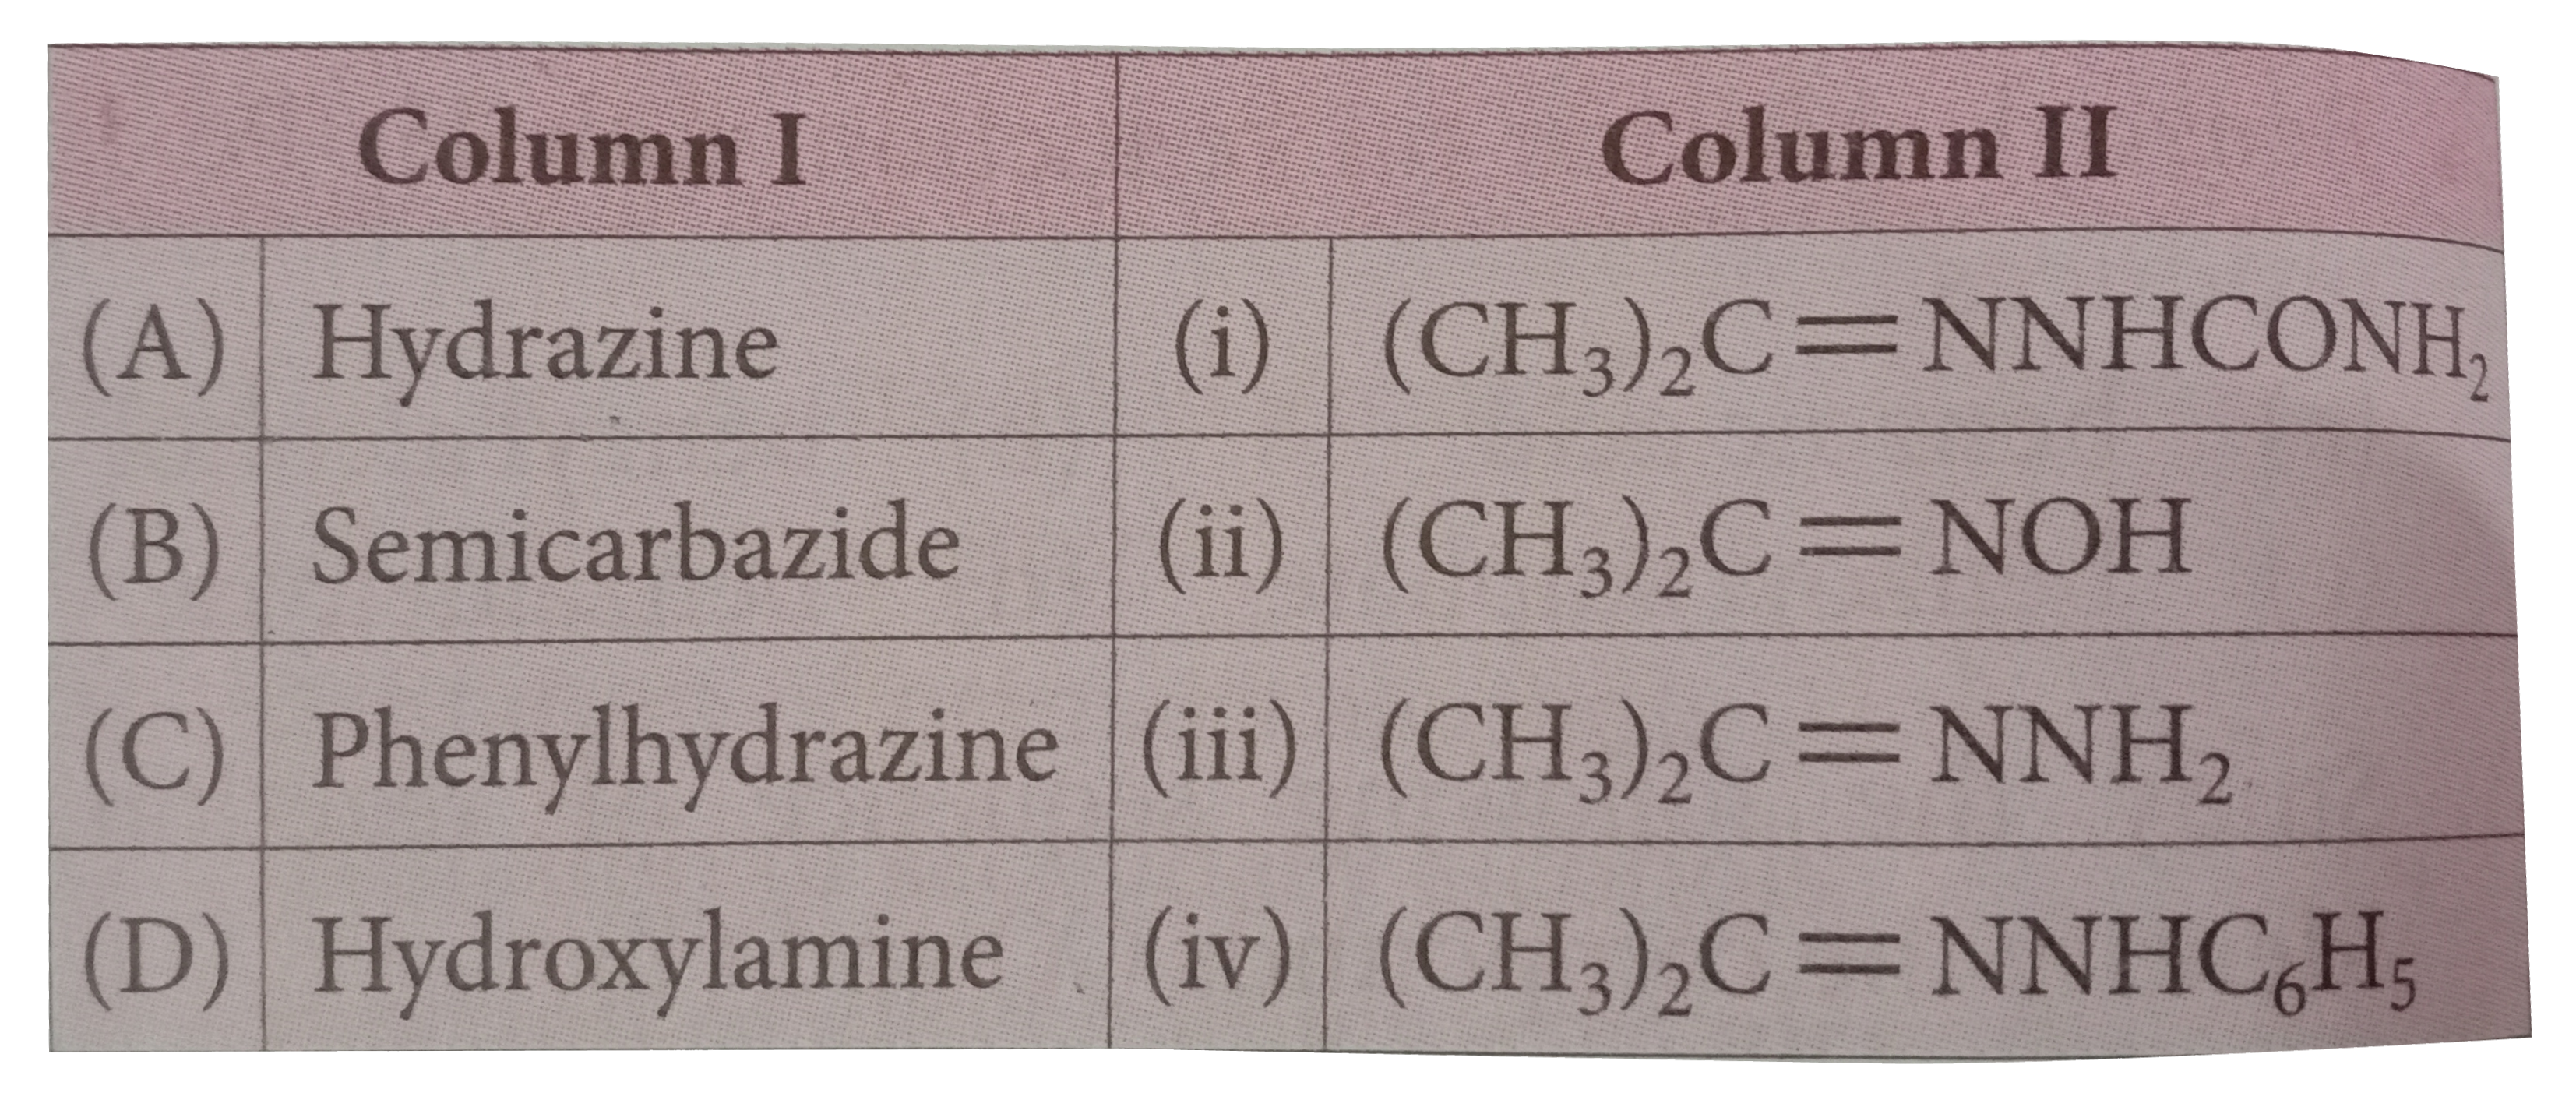 Match the reagents in column I with products formed by reactions with acetone in column II and mark the appropriate choice.